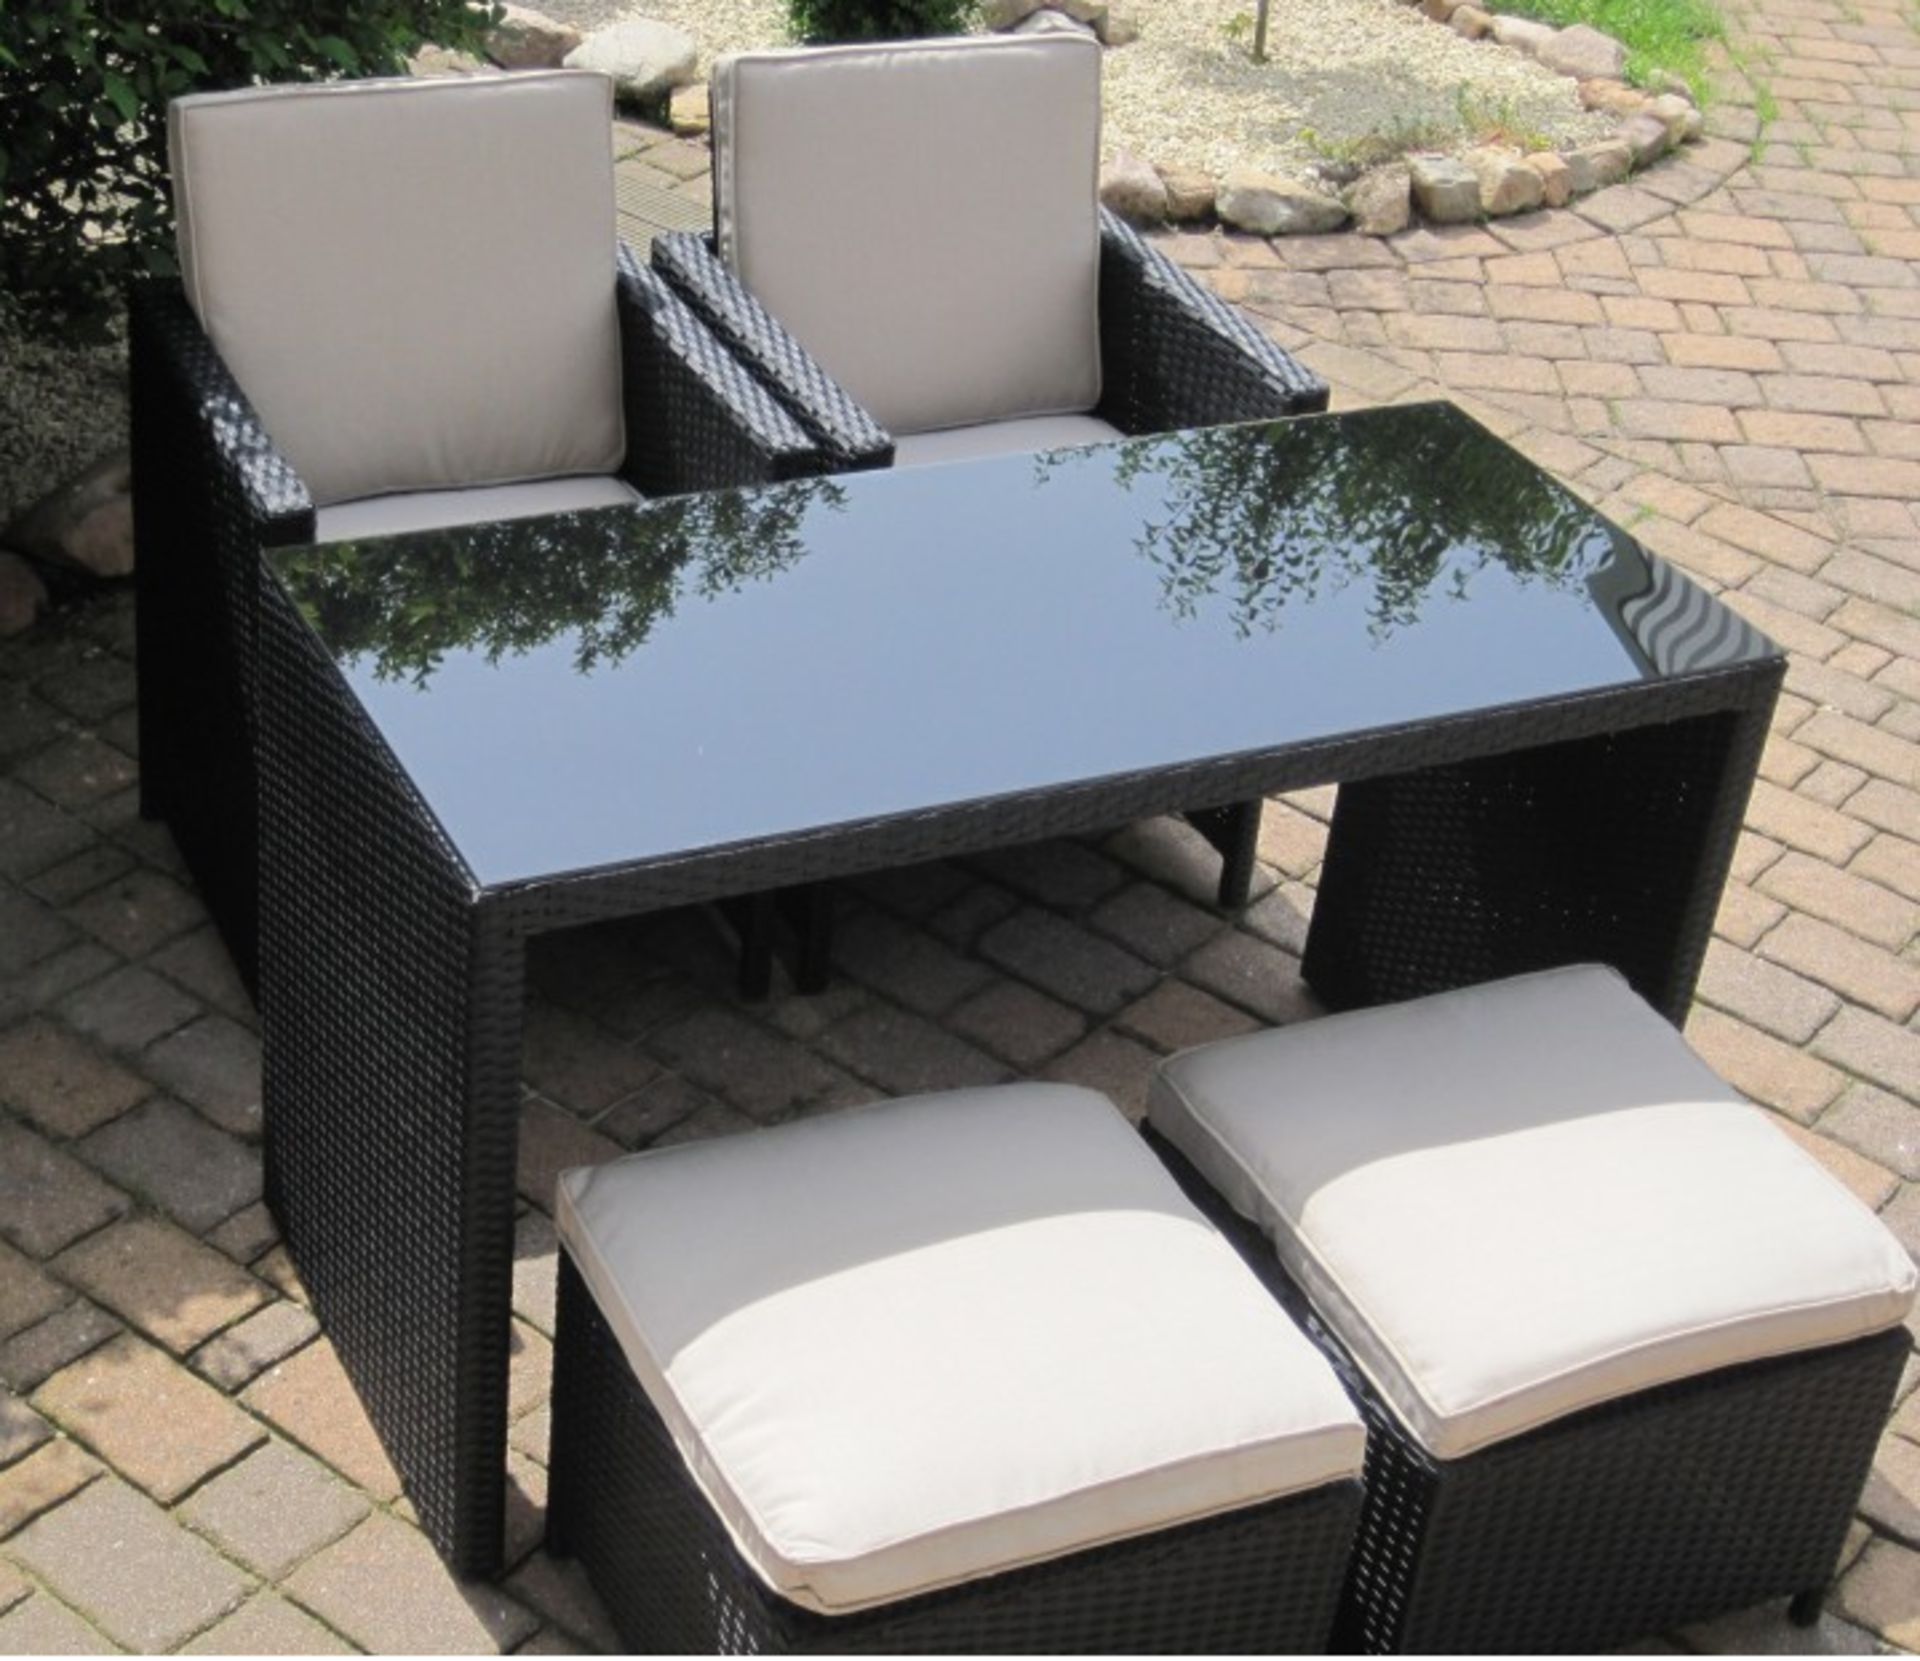 NEW Toscana balcony furniture set in Black - Image 2 of 10